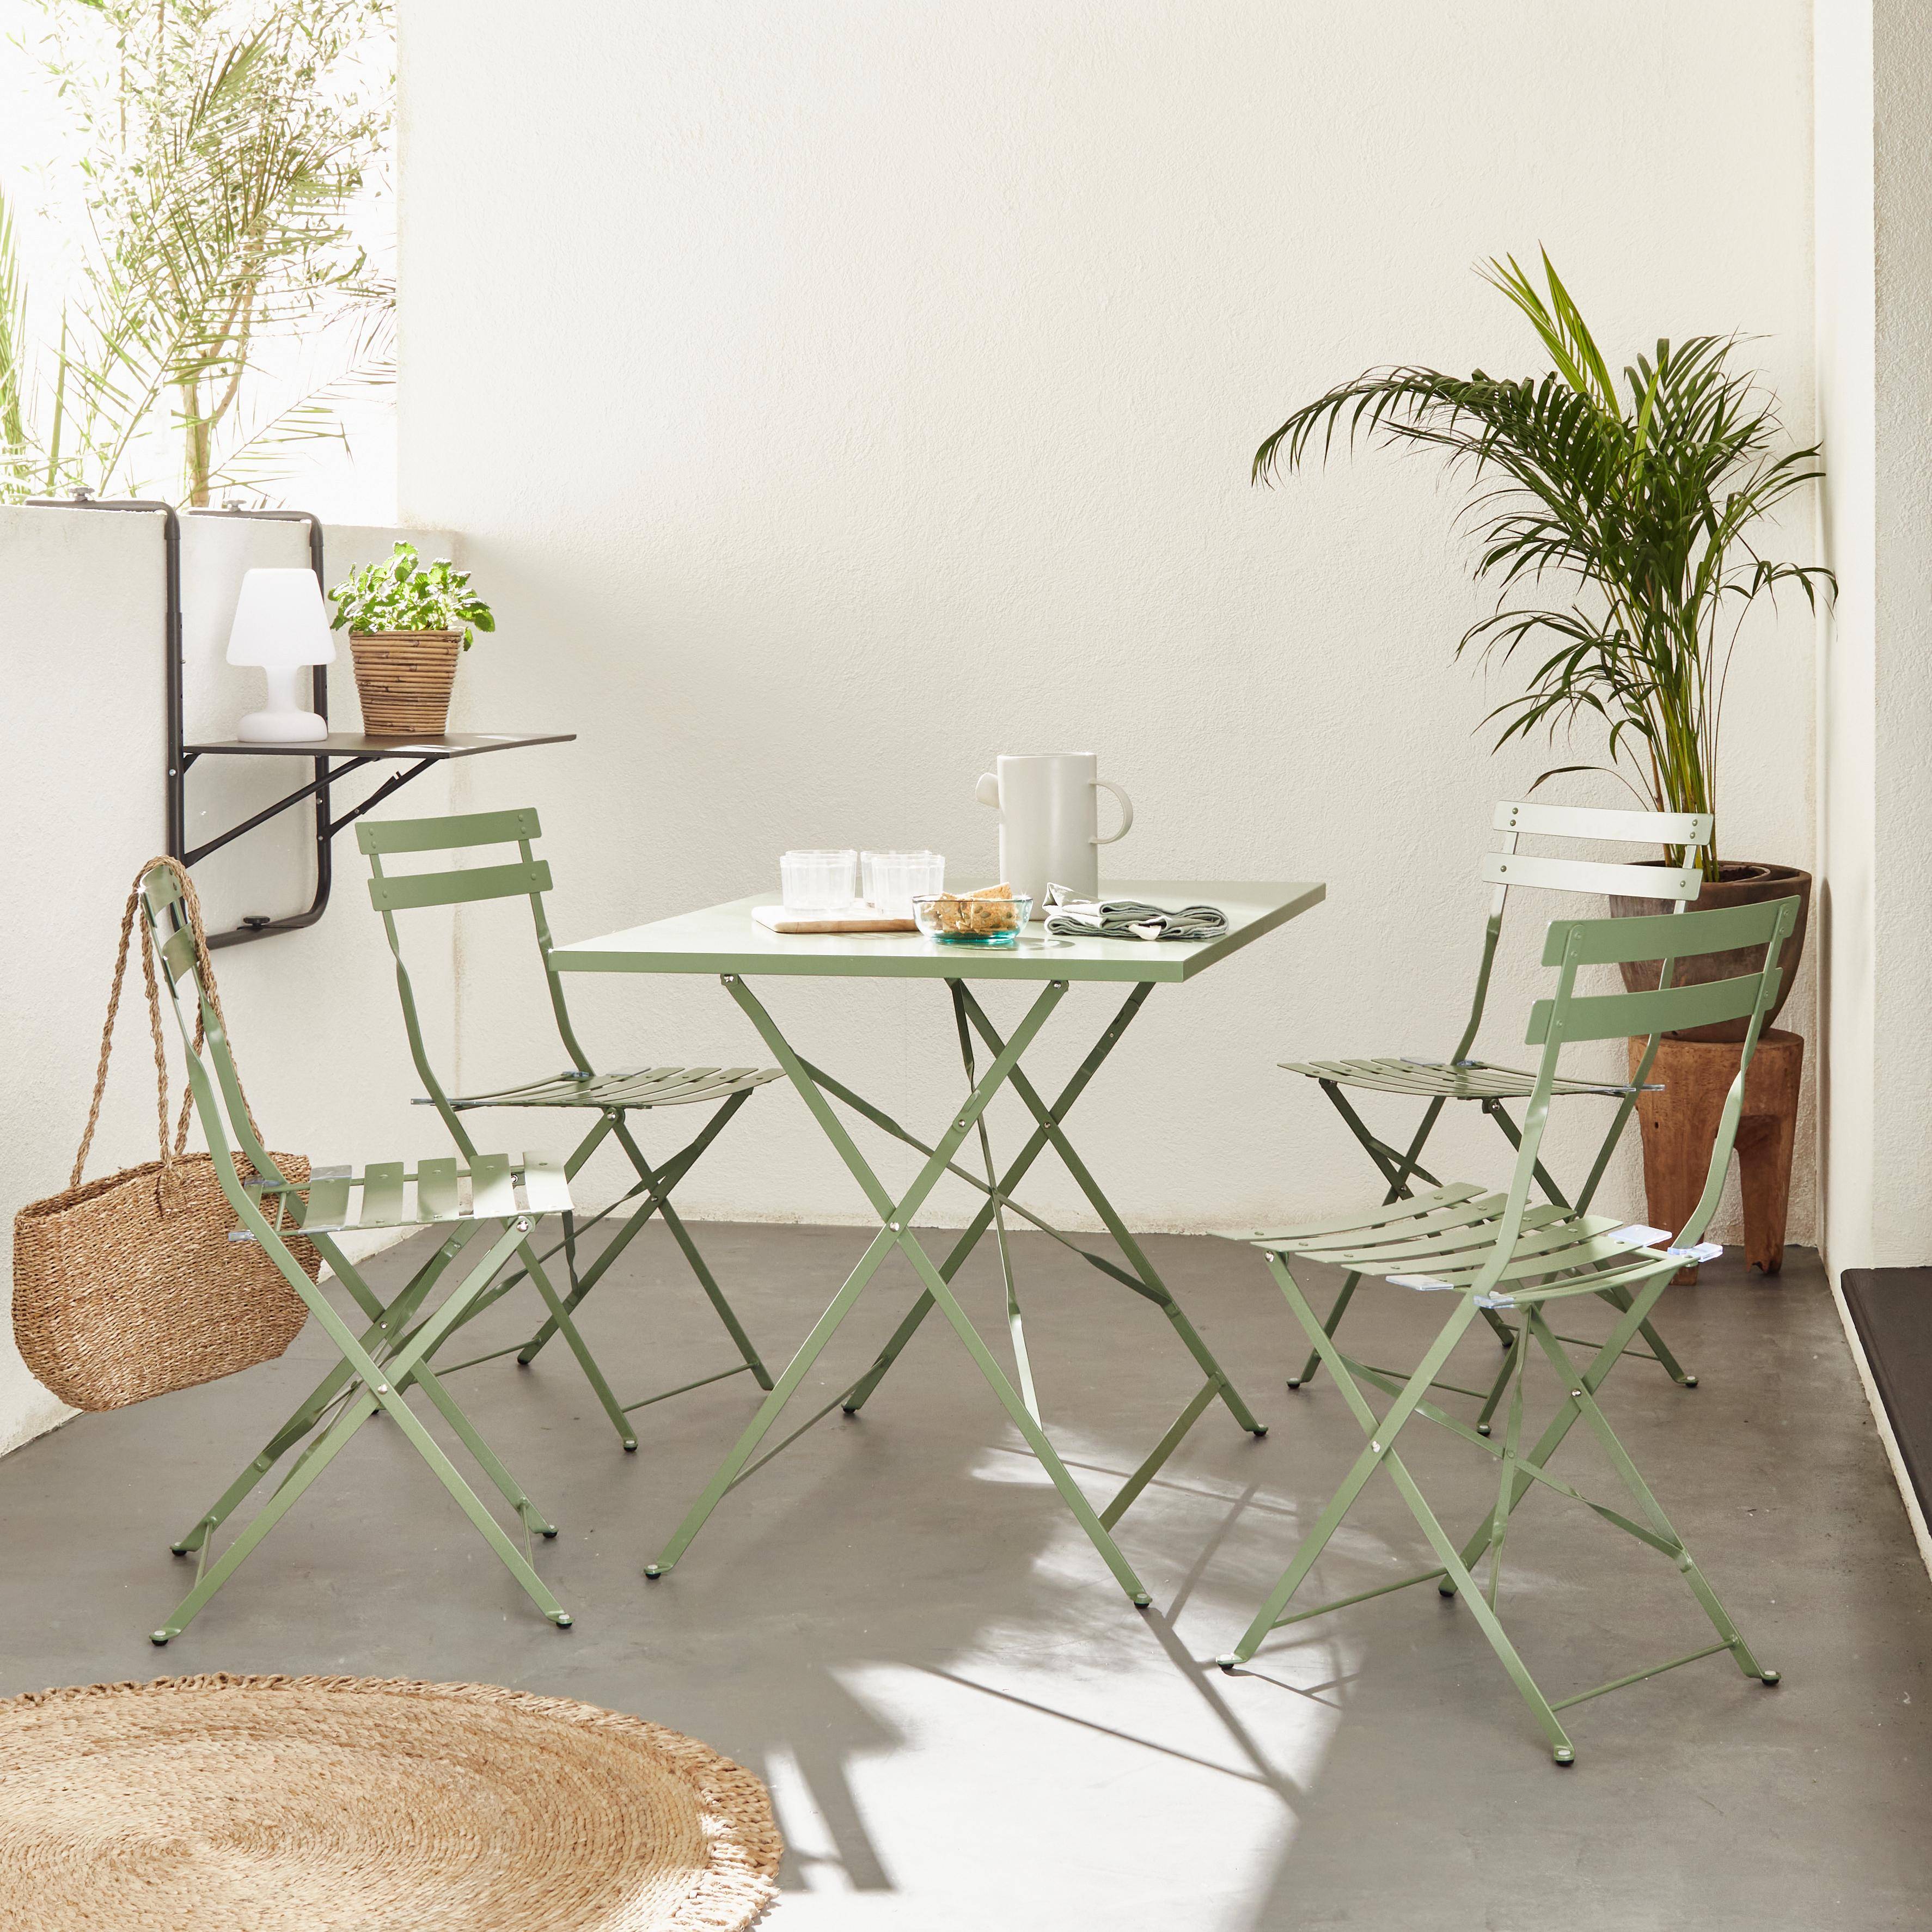 4-seater foldable thermo-lacquered steel bistro garden table with chairs, 110x70cm - Emilia - Sage green,sweeek,Photo1